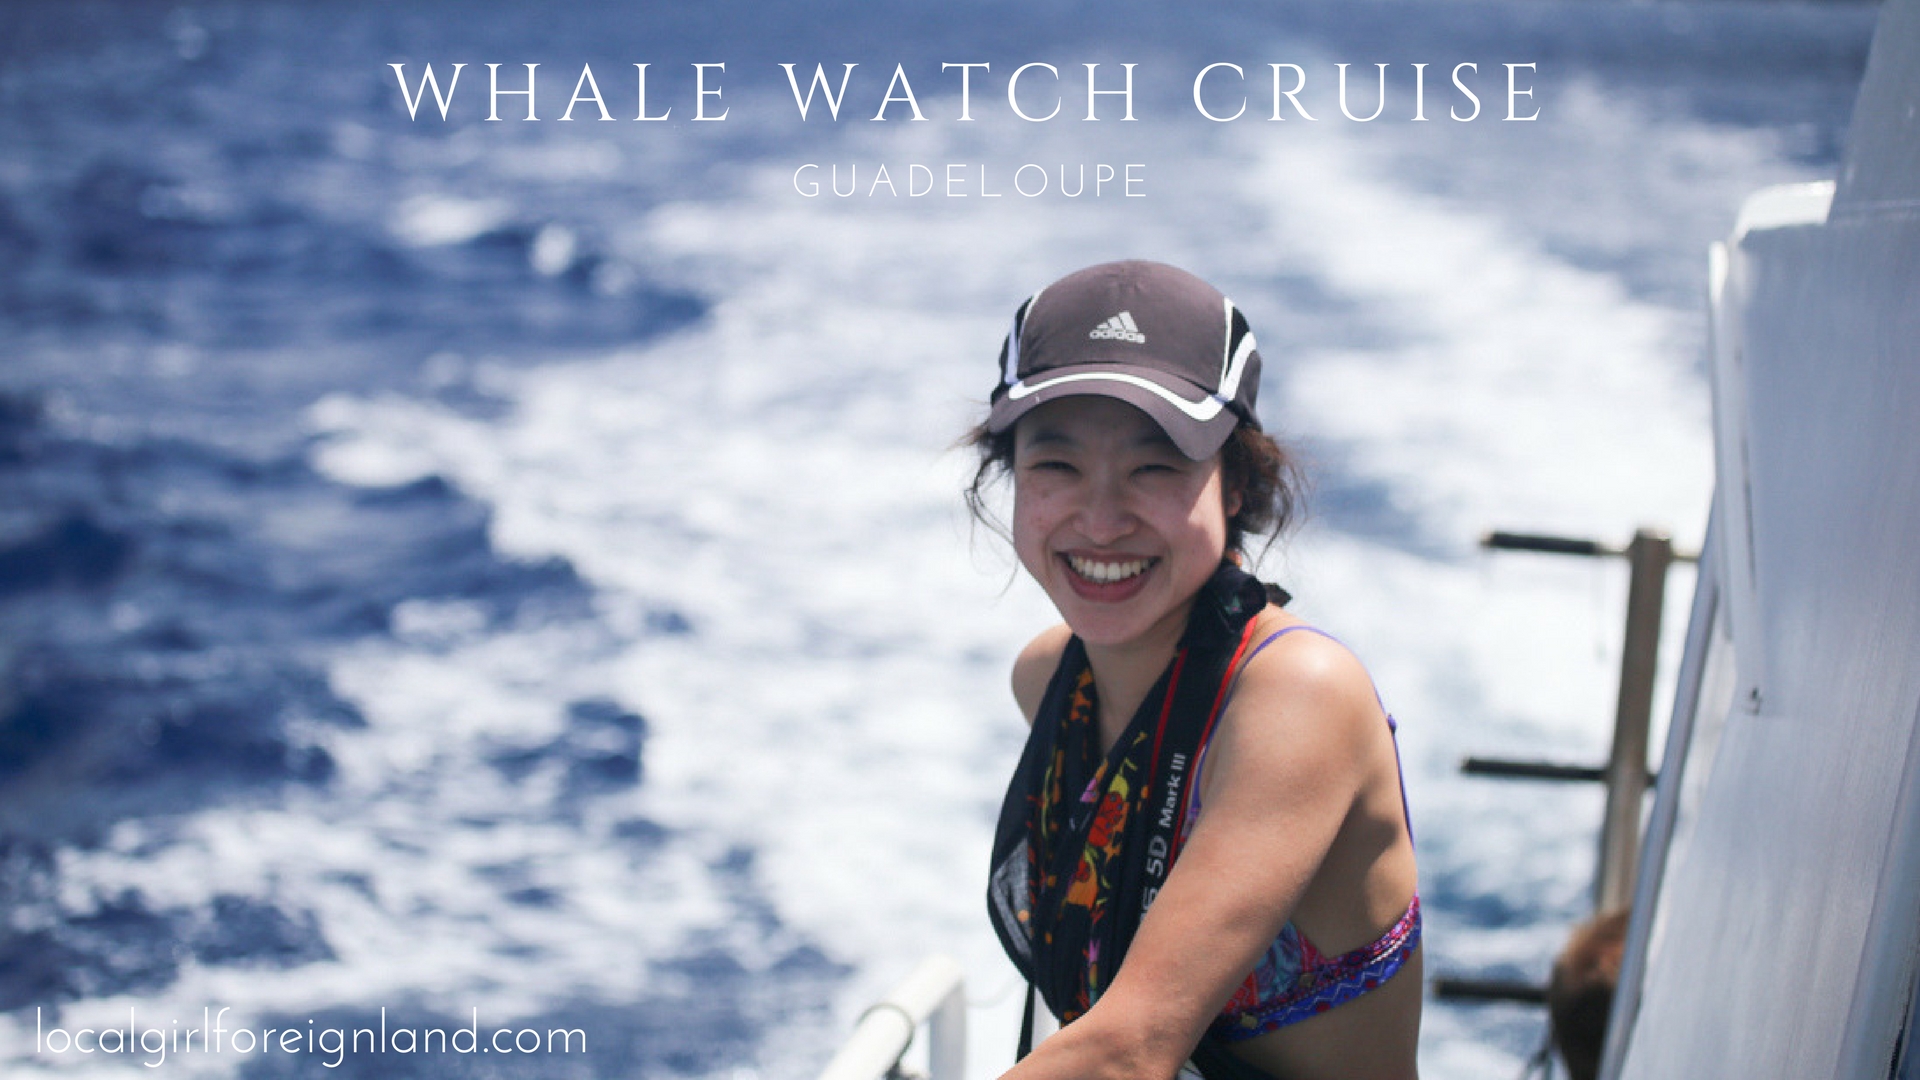 Whale watch cruise, Guadeloupe – Local Girl Foreign Land